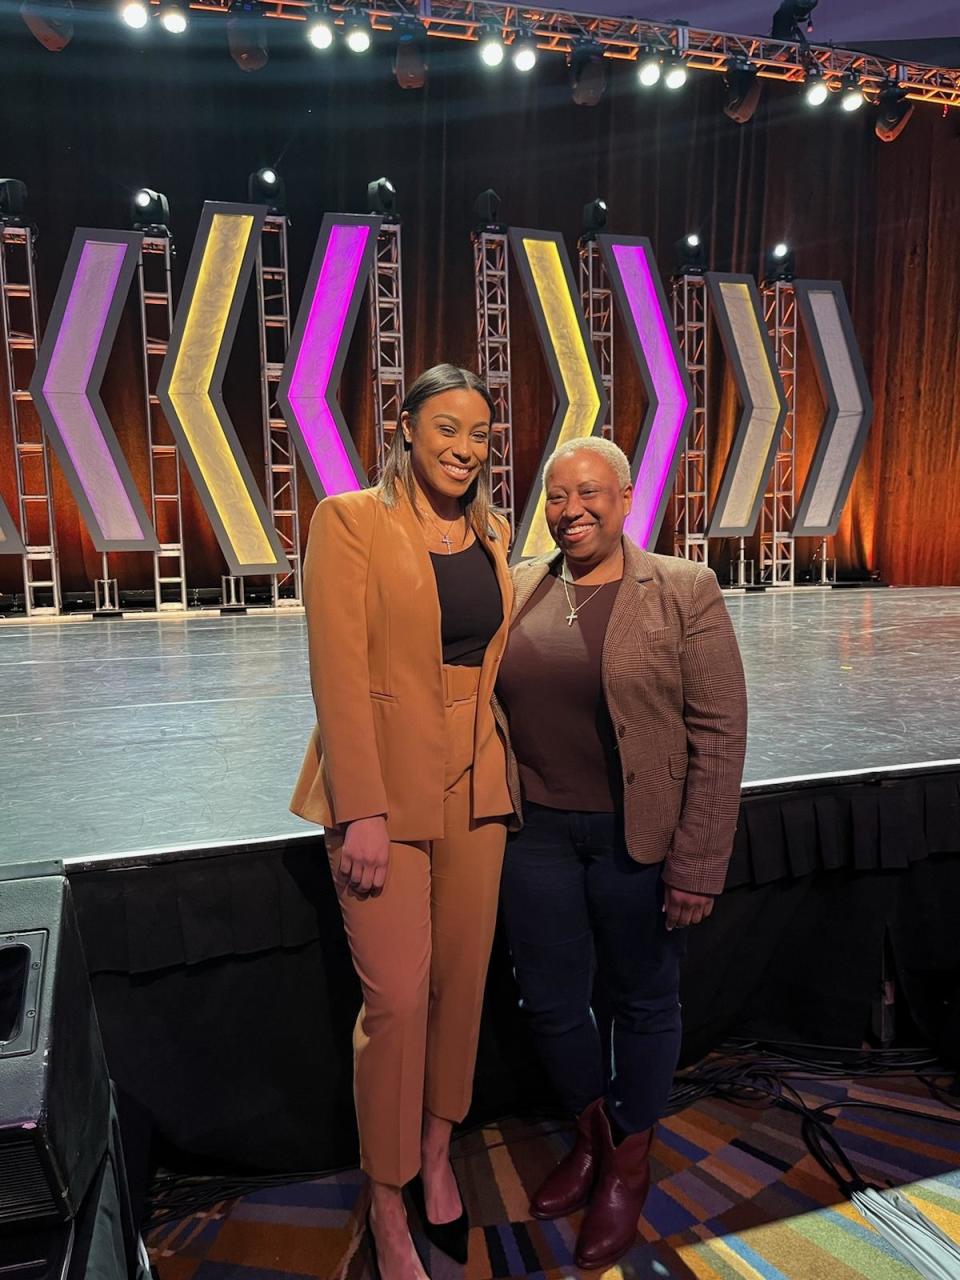 From left: Sharnese Marshall and her mom, Suzanne Marshall, at Huntington Place in Detroit on Feb. 5 2023 where the Konnection was being honored.